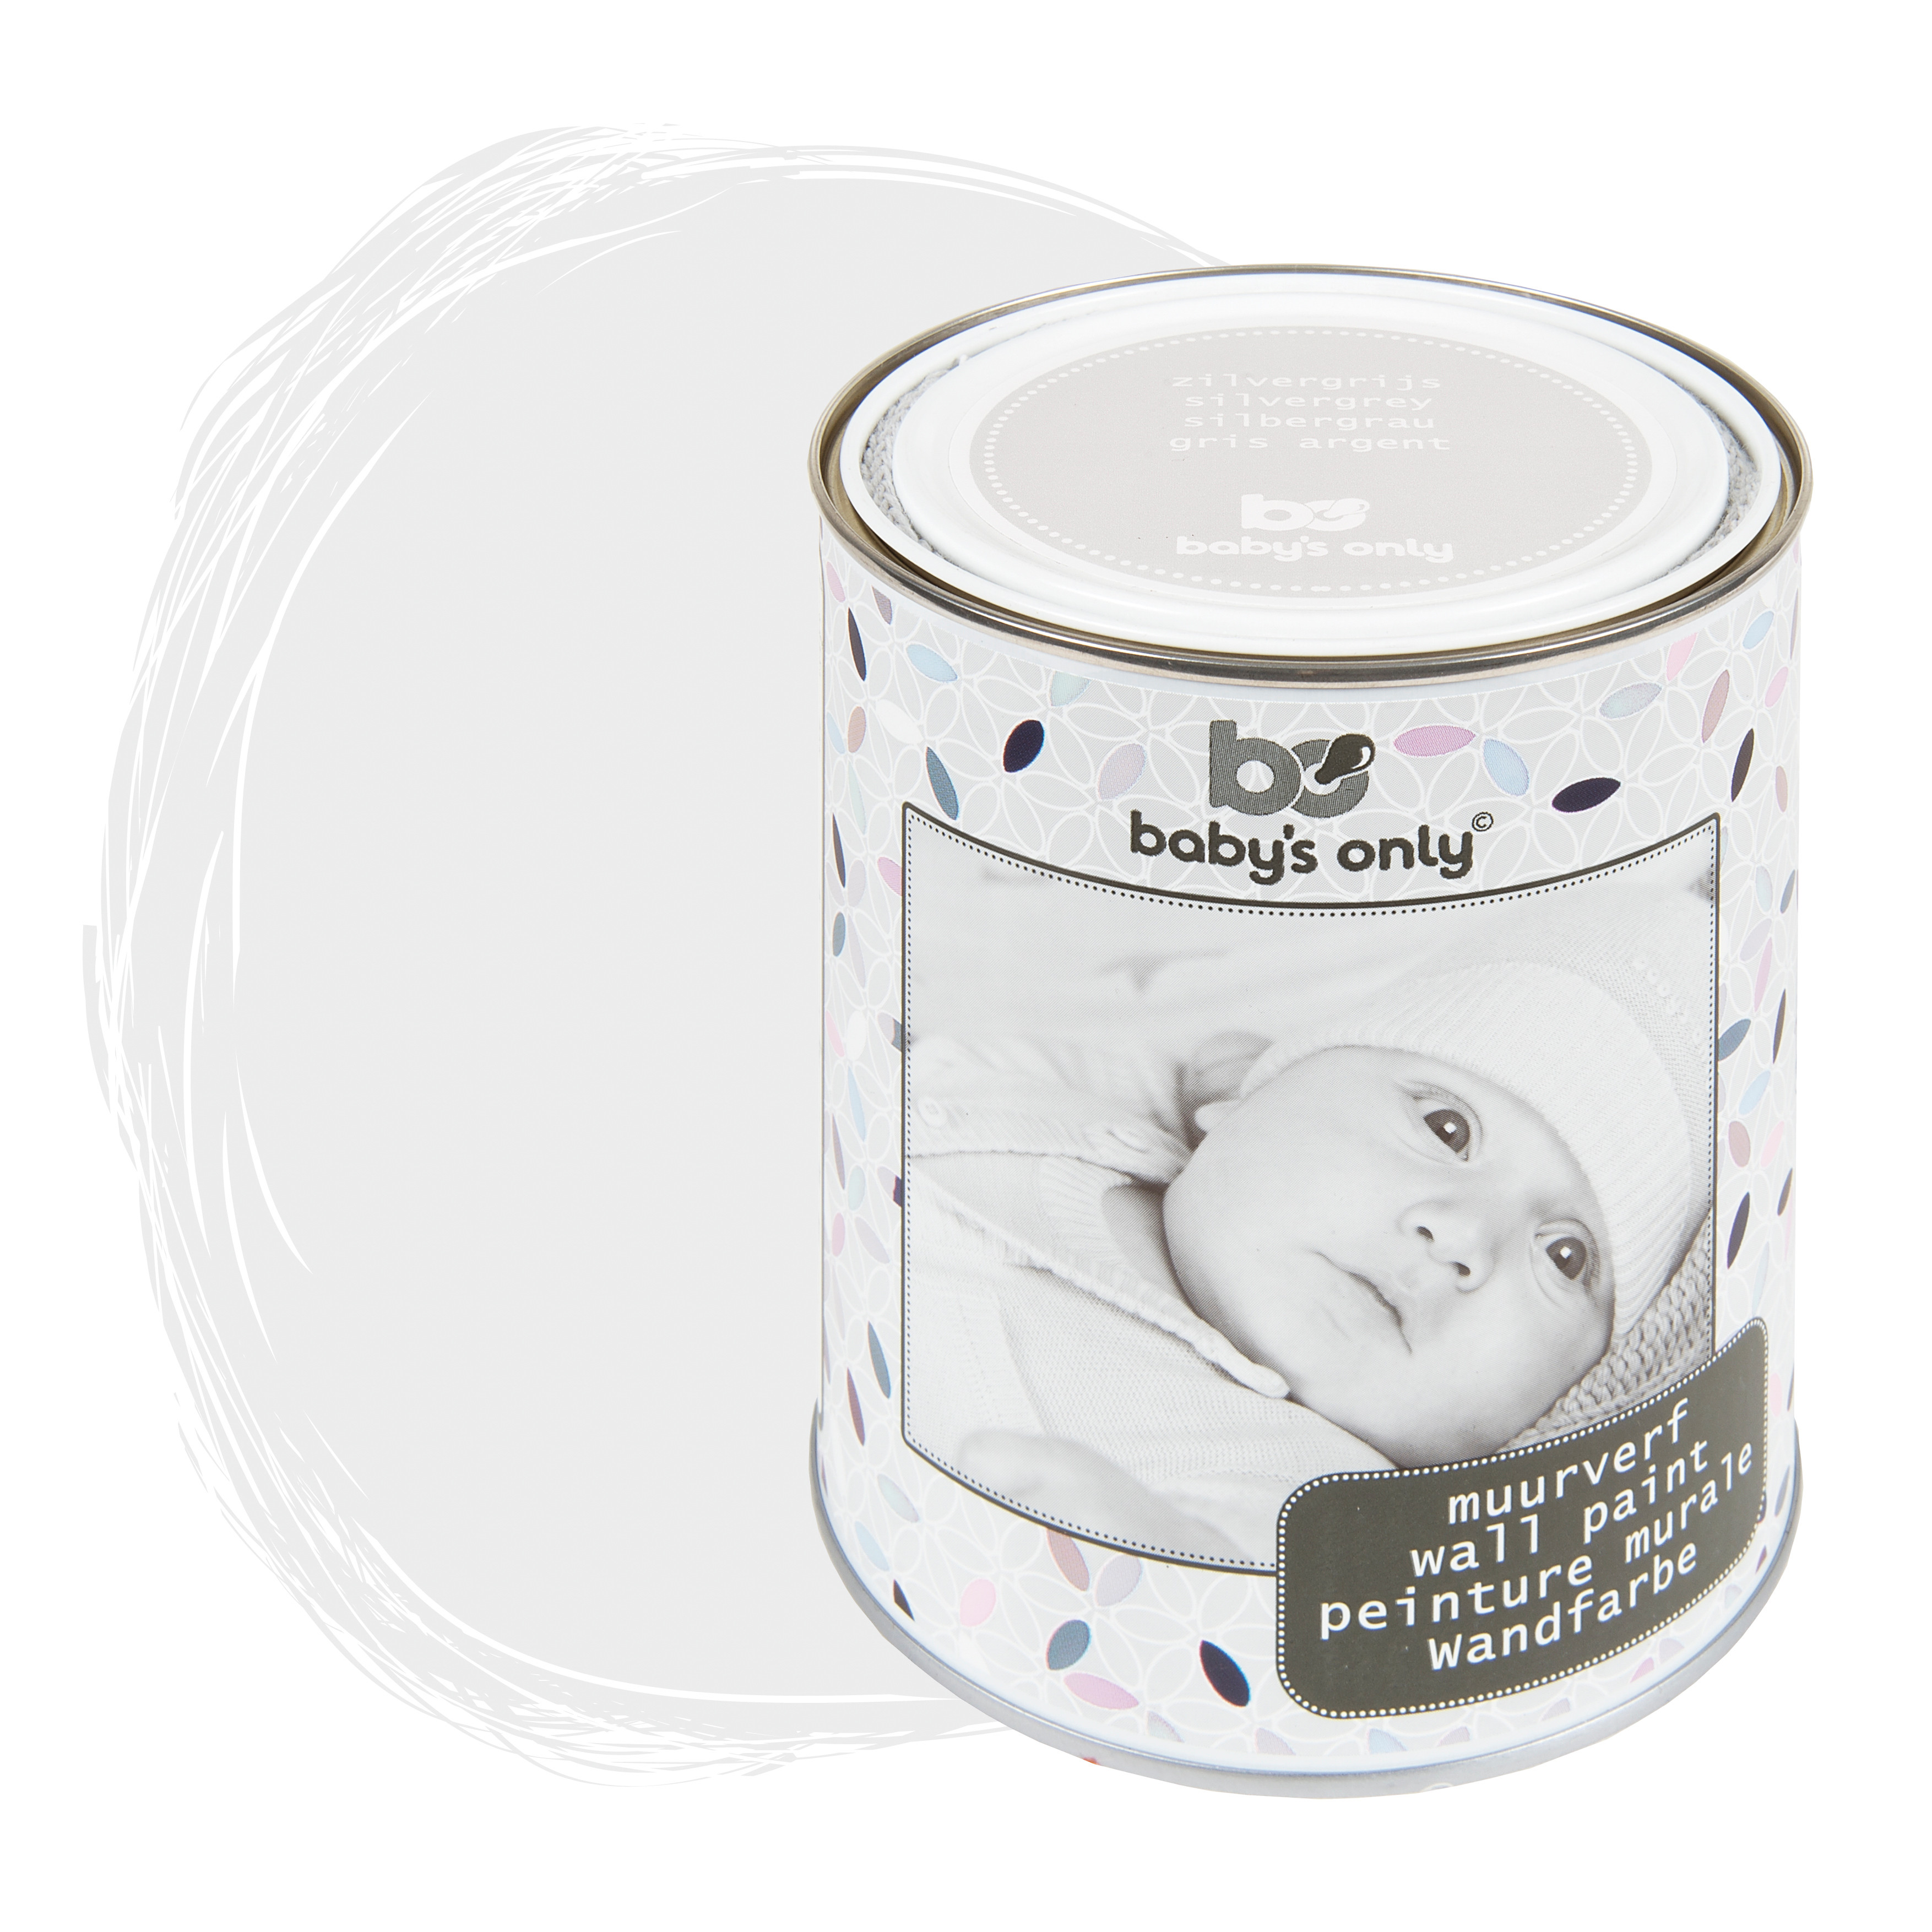 Wall paint silver-grey - 1 liter